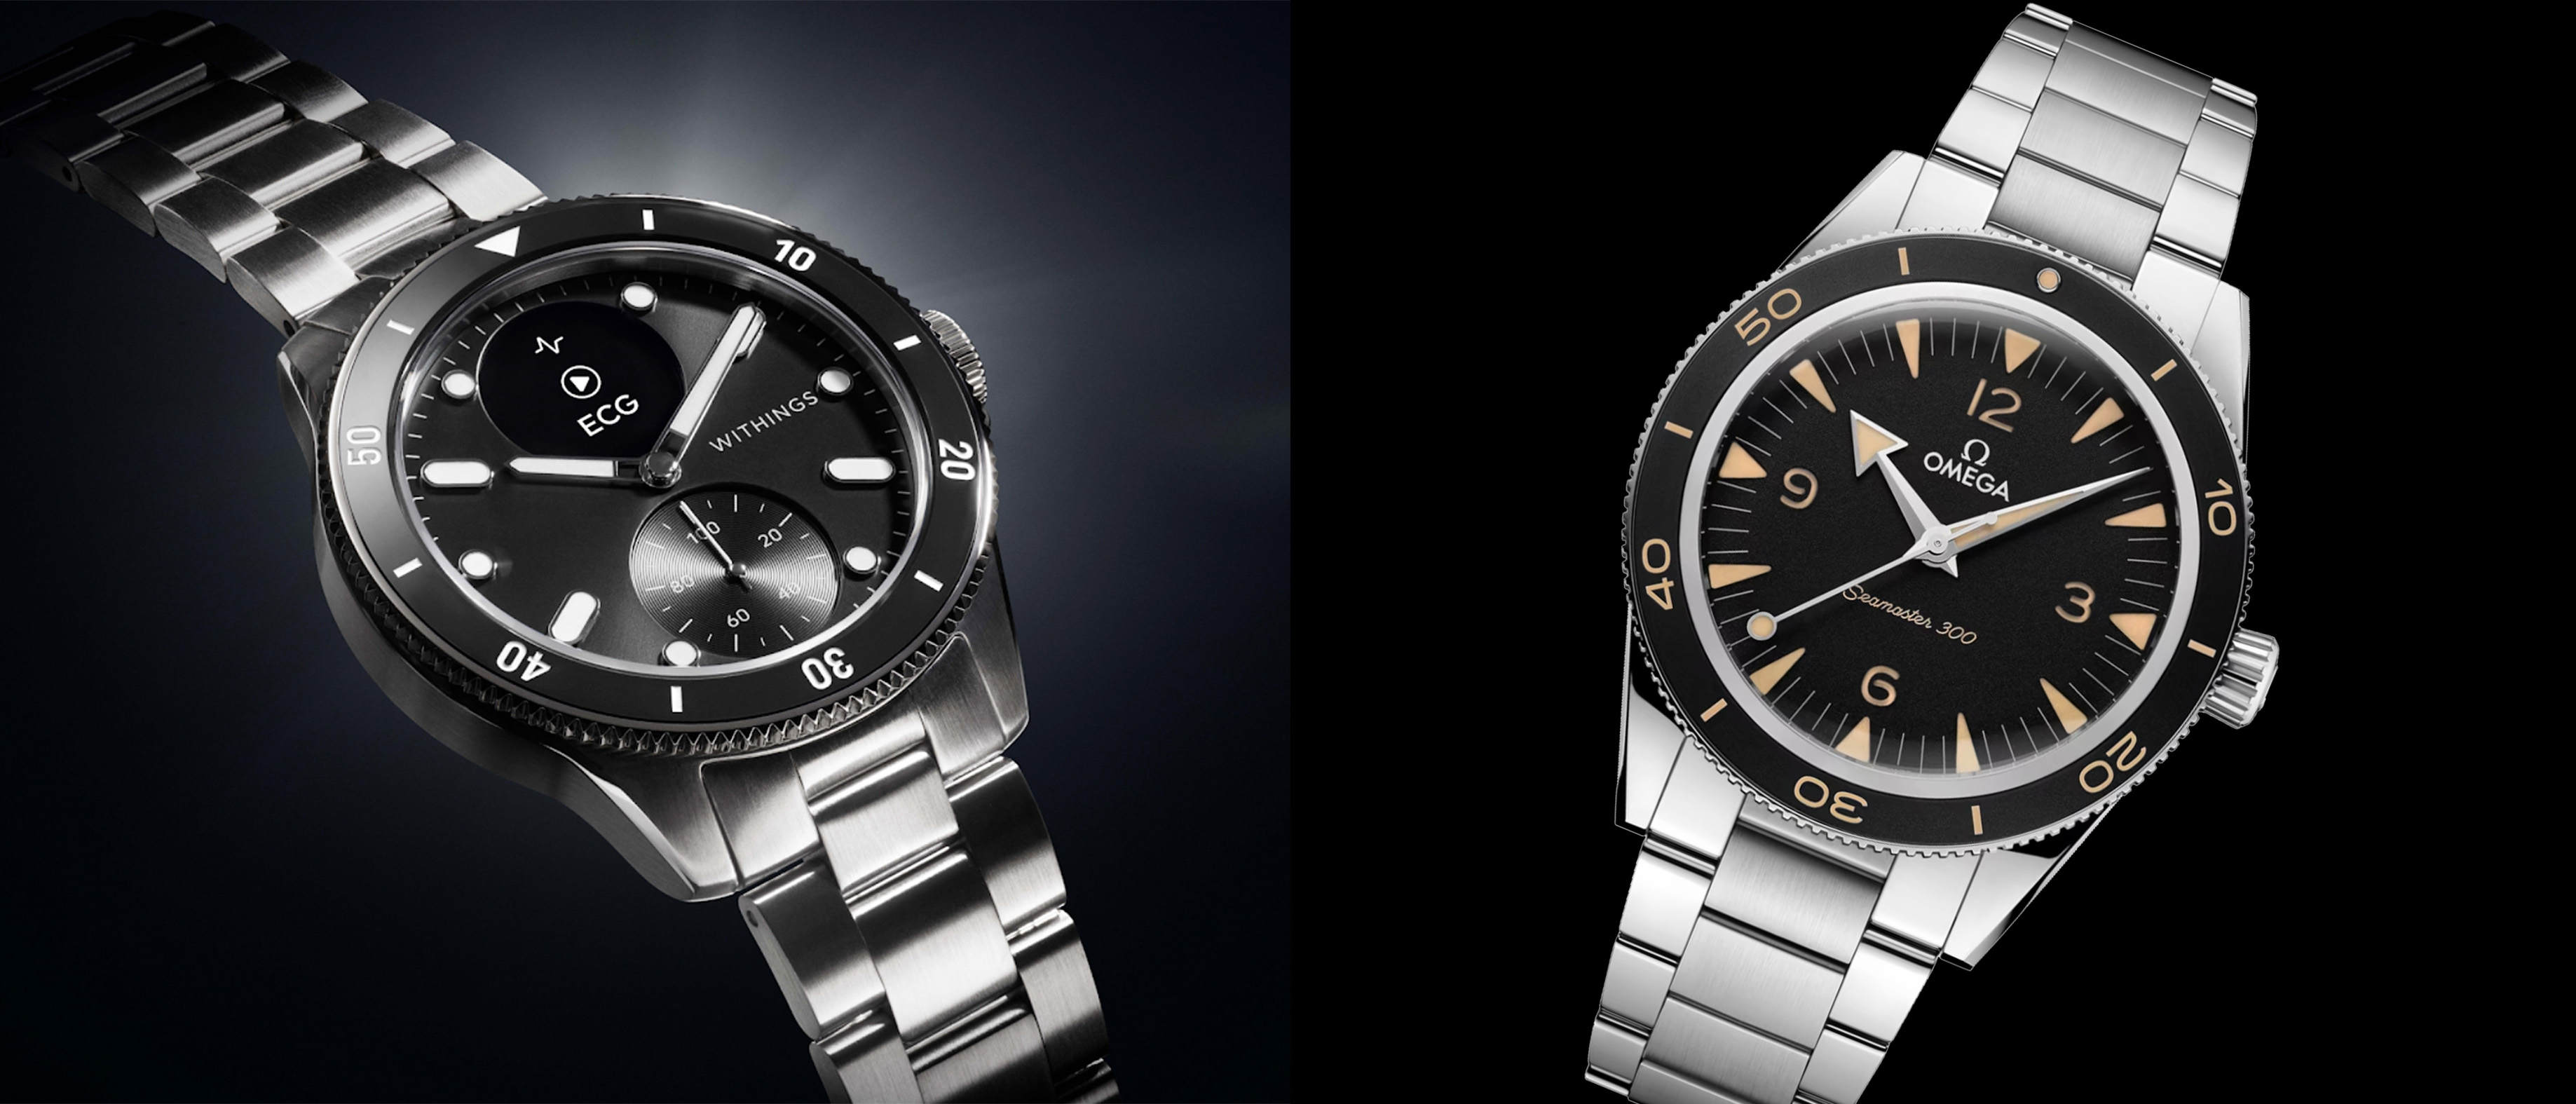 ScanWatch Nova on the left, Omega Seamaster on the right.